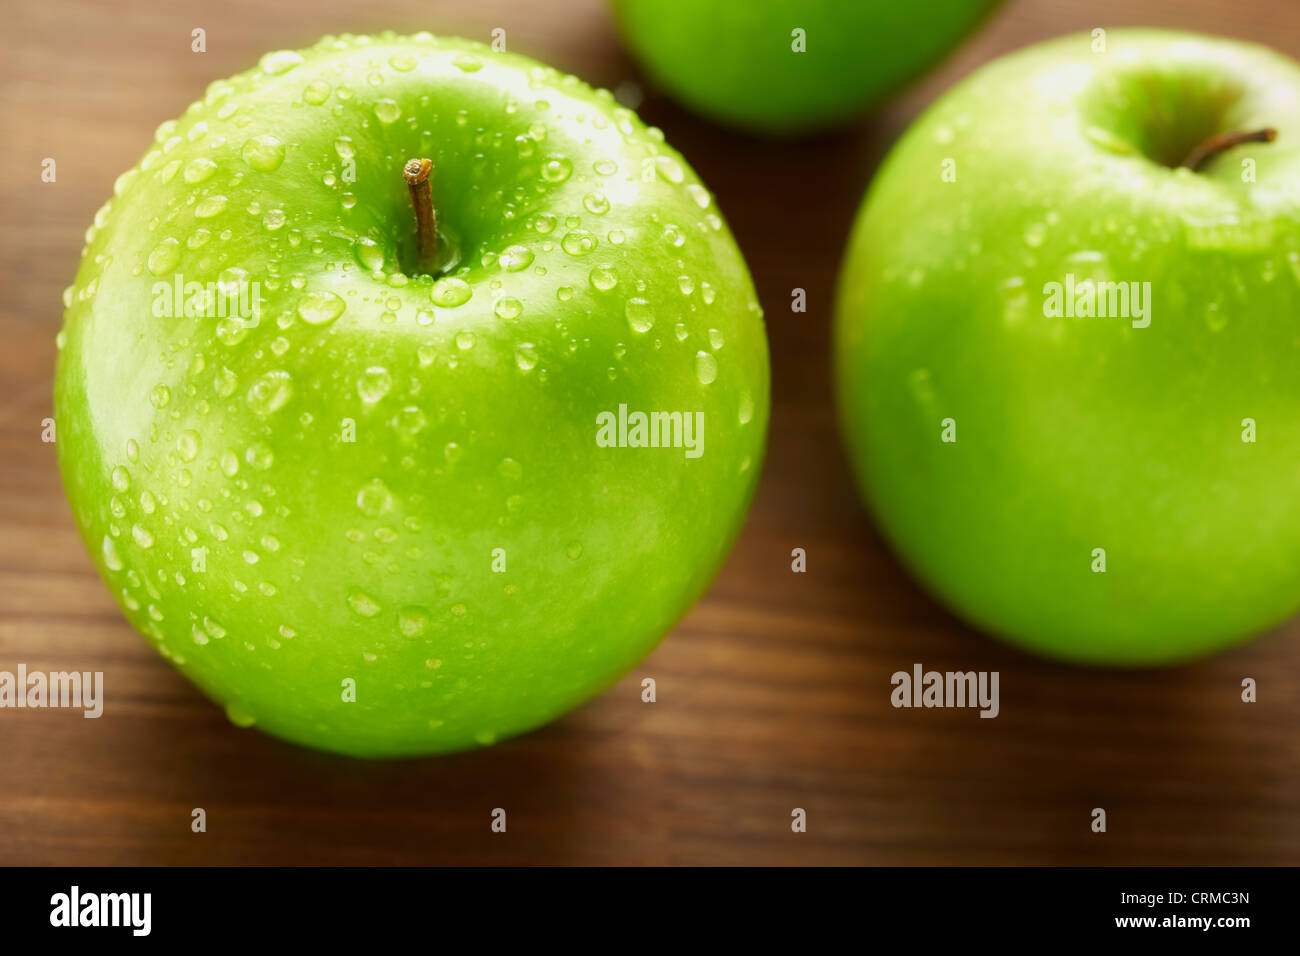 Healthy nutrition concept with apples on the wooden table, selective focus Stock Photo